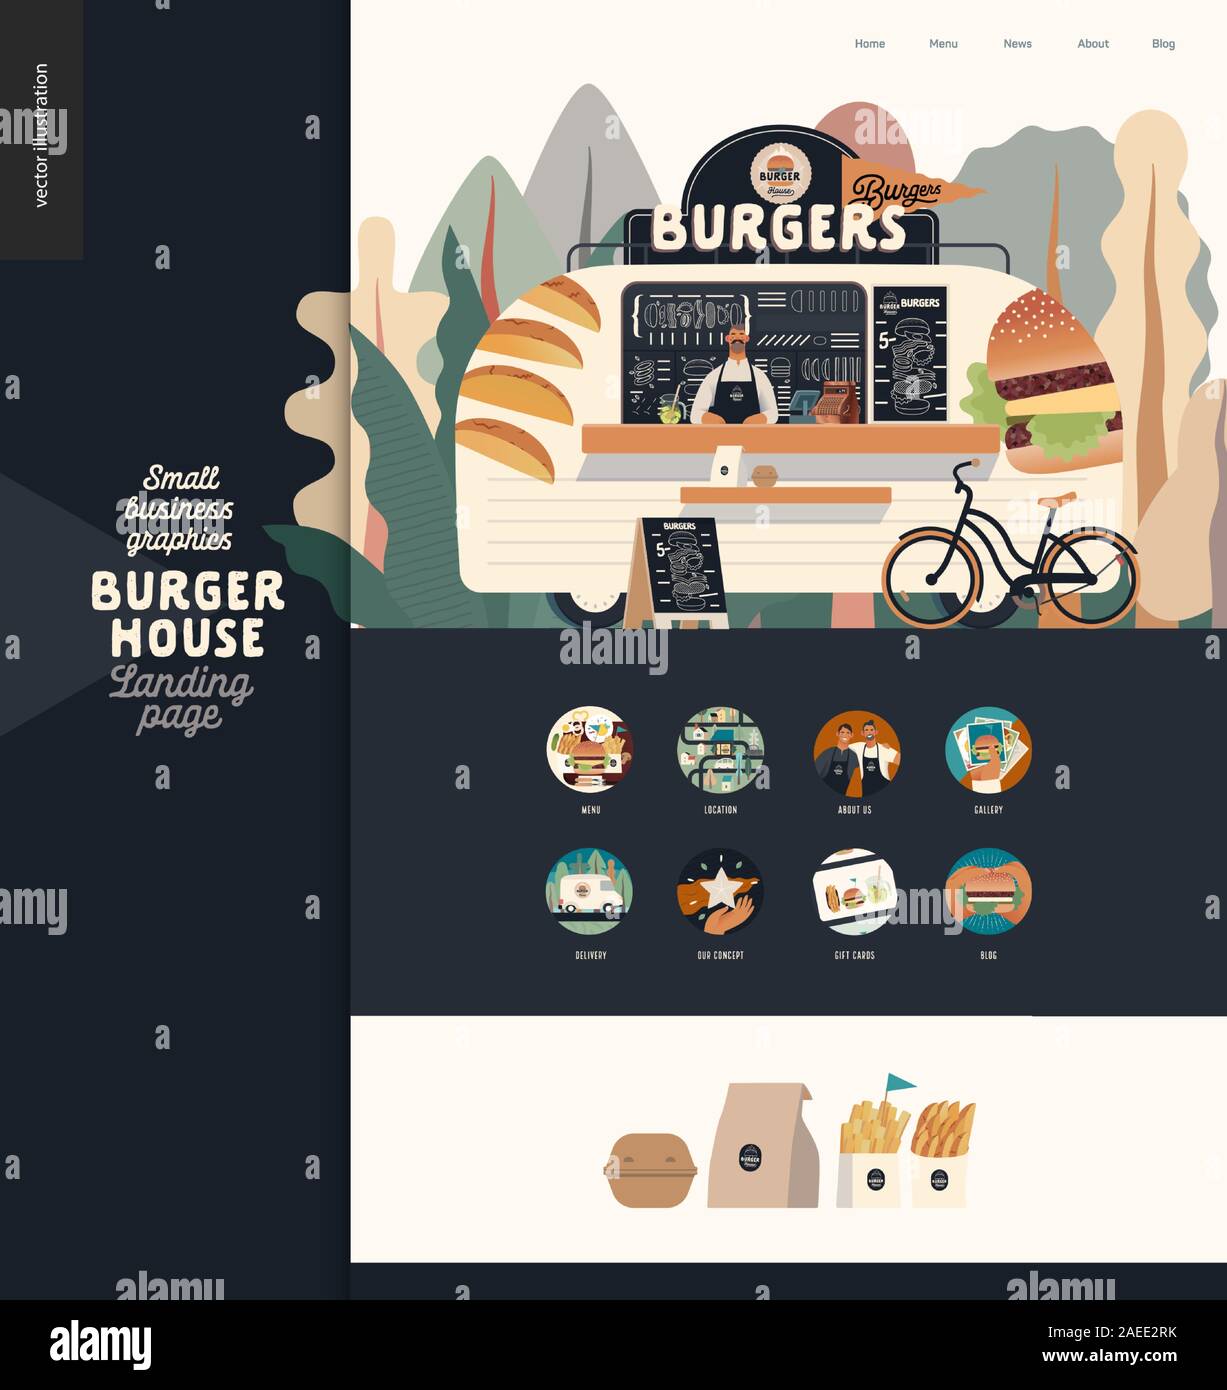 Burger house - small business graphics - landing page design template - modern flat vector concept illustration of a burgers street food truck van, se Stock Vector